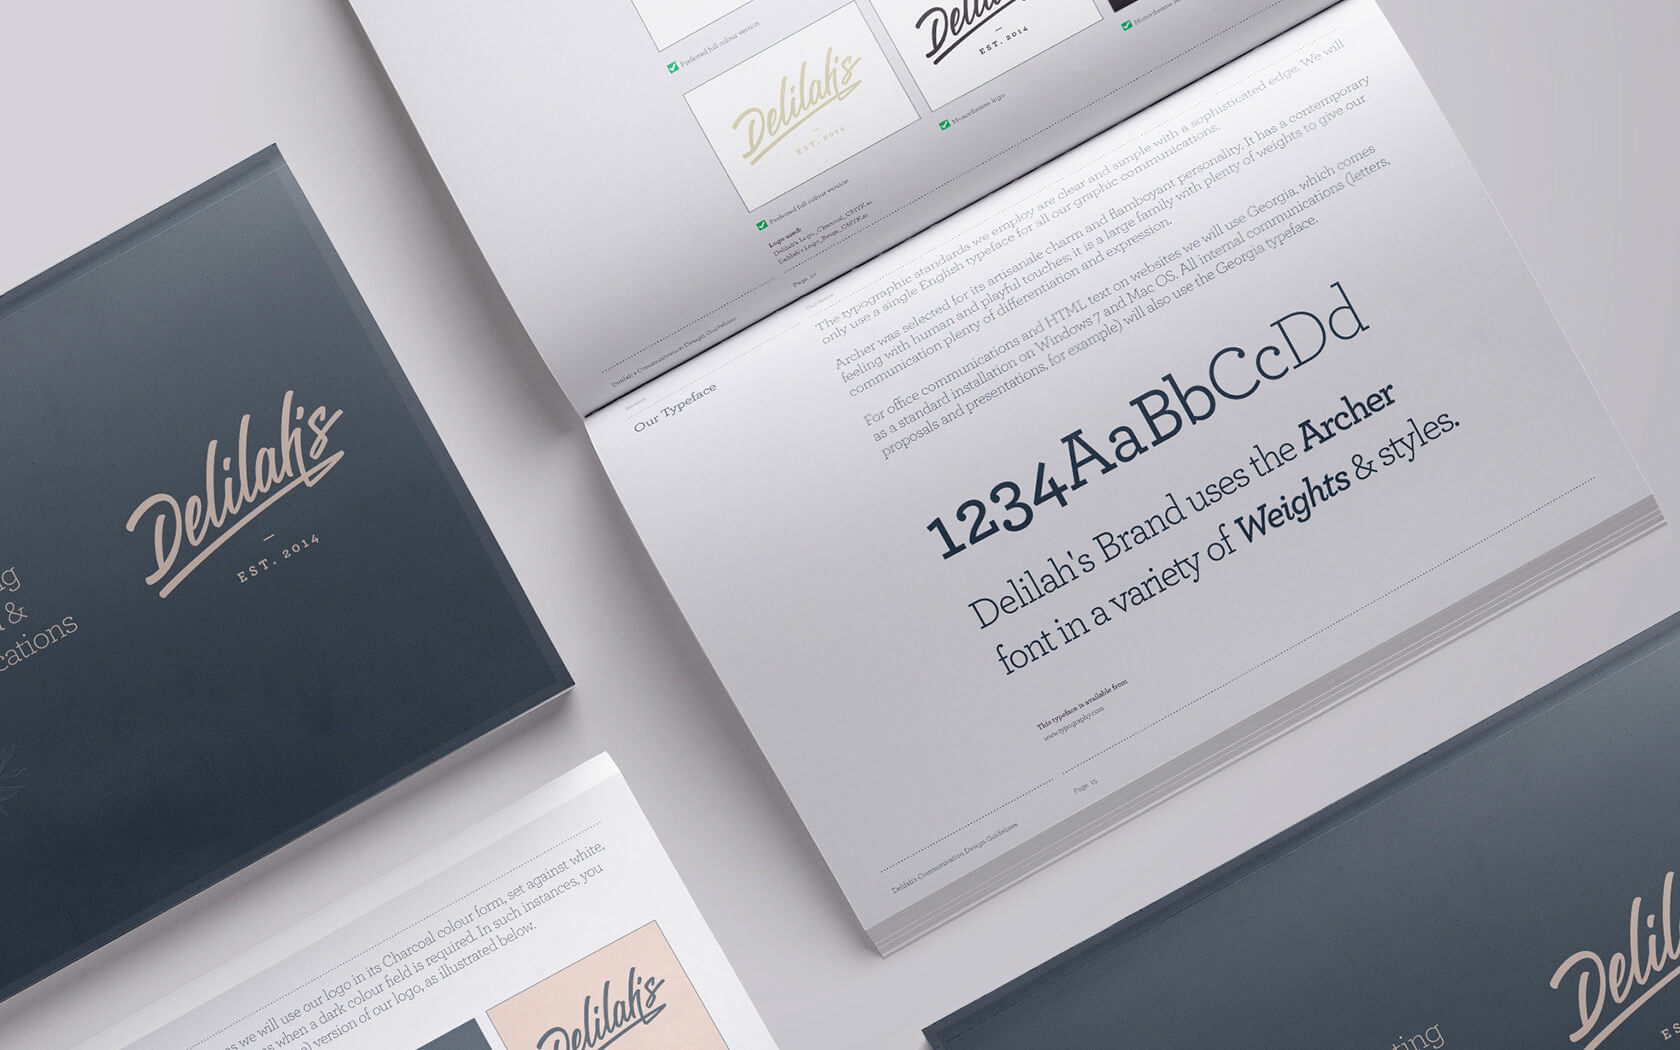 Delilah’s. Brand guidelines typeface spread